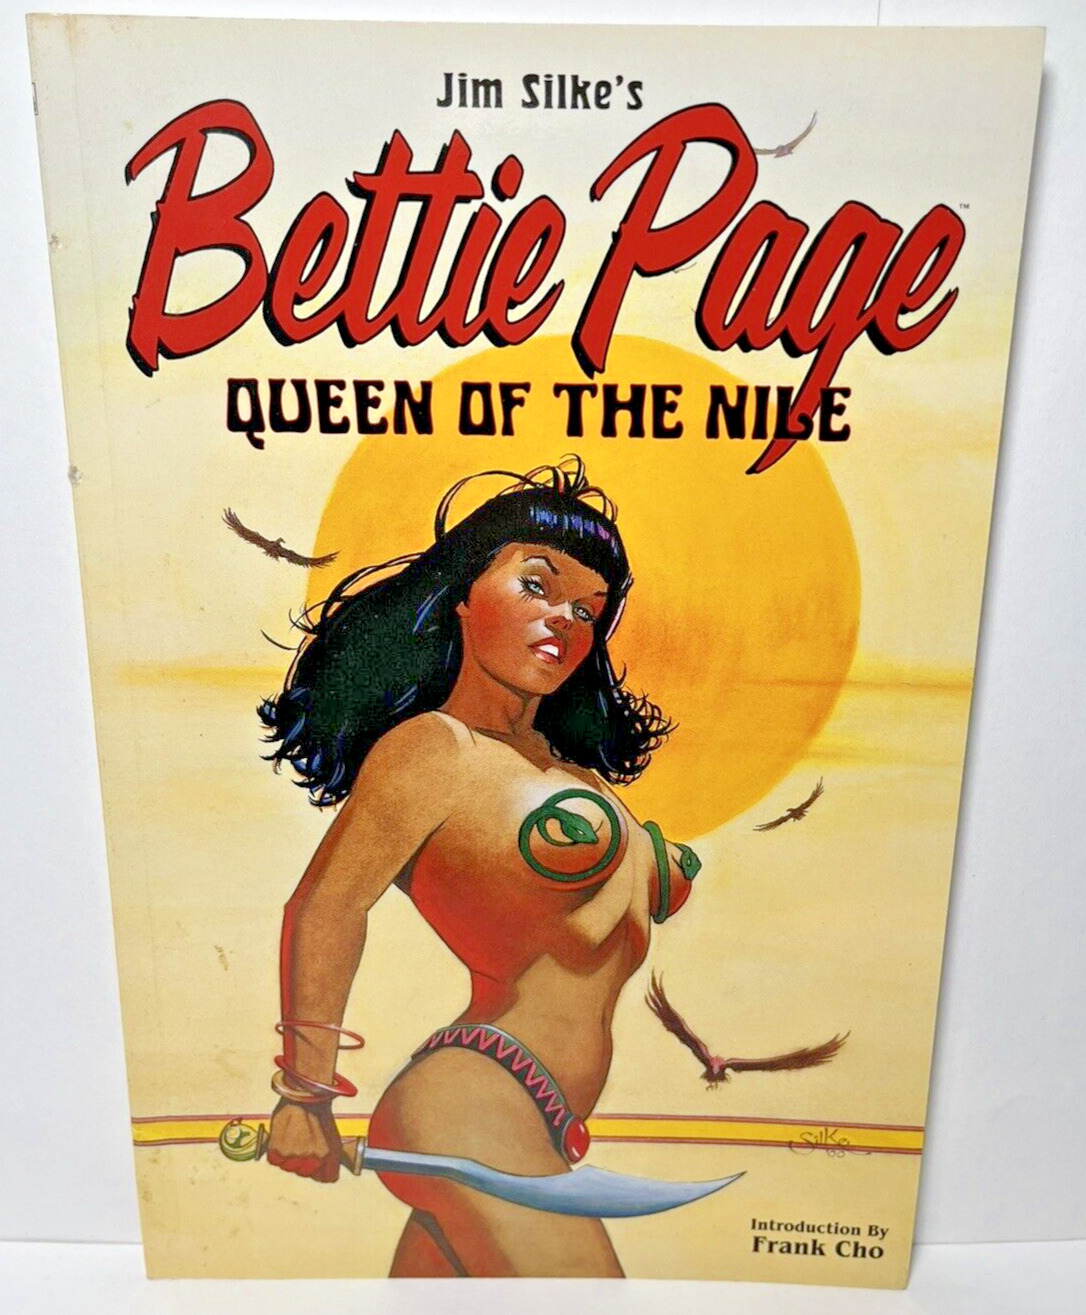 Jim Silke's Bettie Page Queen of the Nile Dark Horse Comics Book 1st Edition